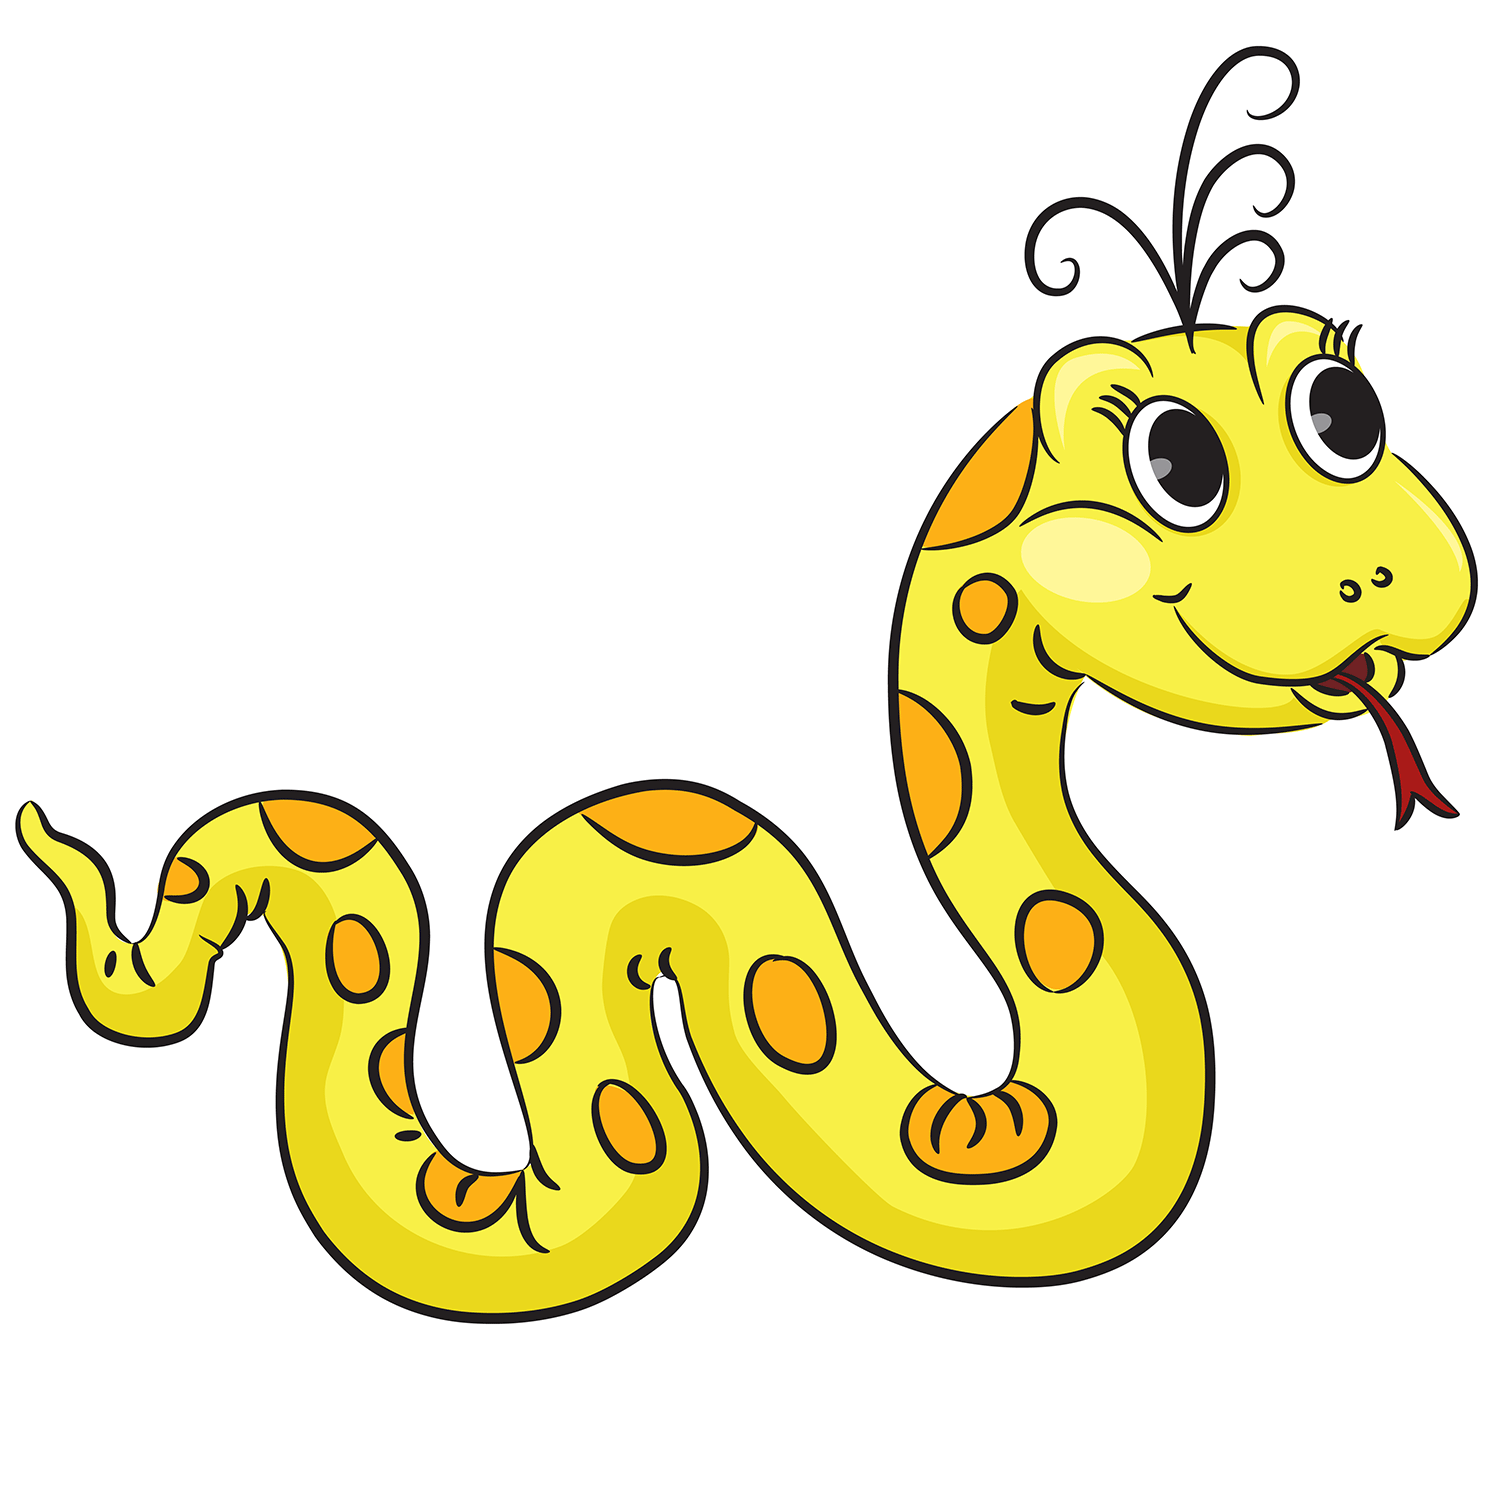 Cartoon snakes clip art page 2 snake images clipart free clip 3